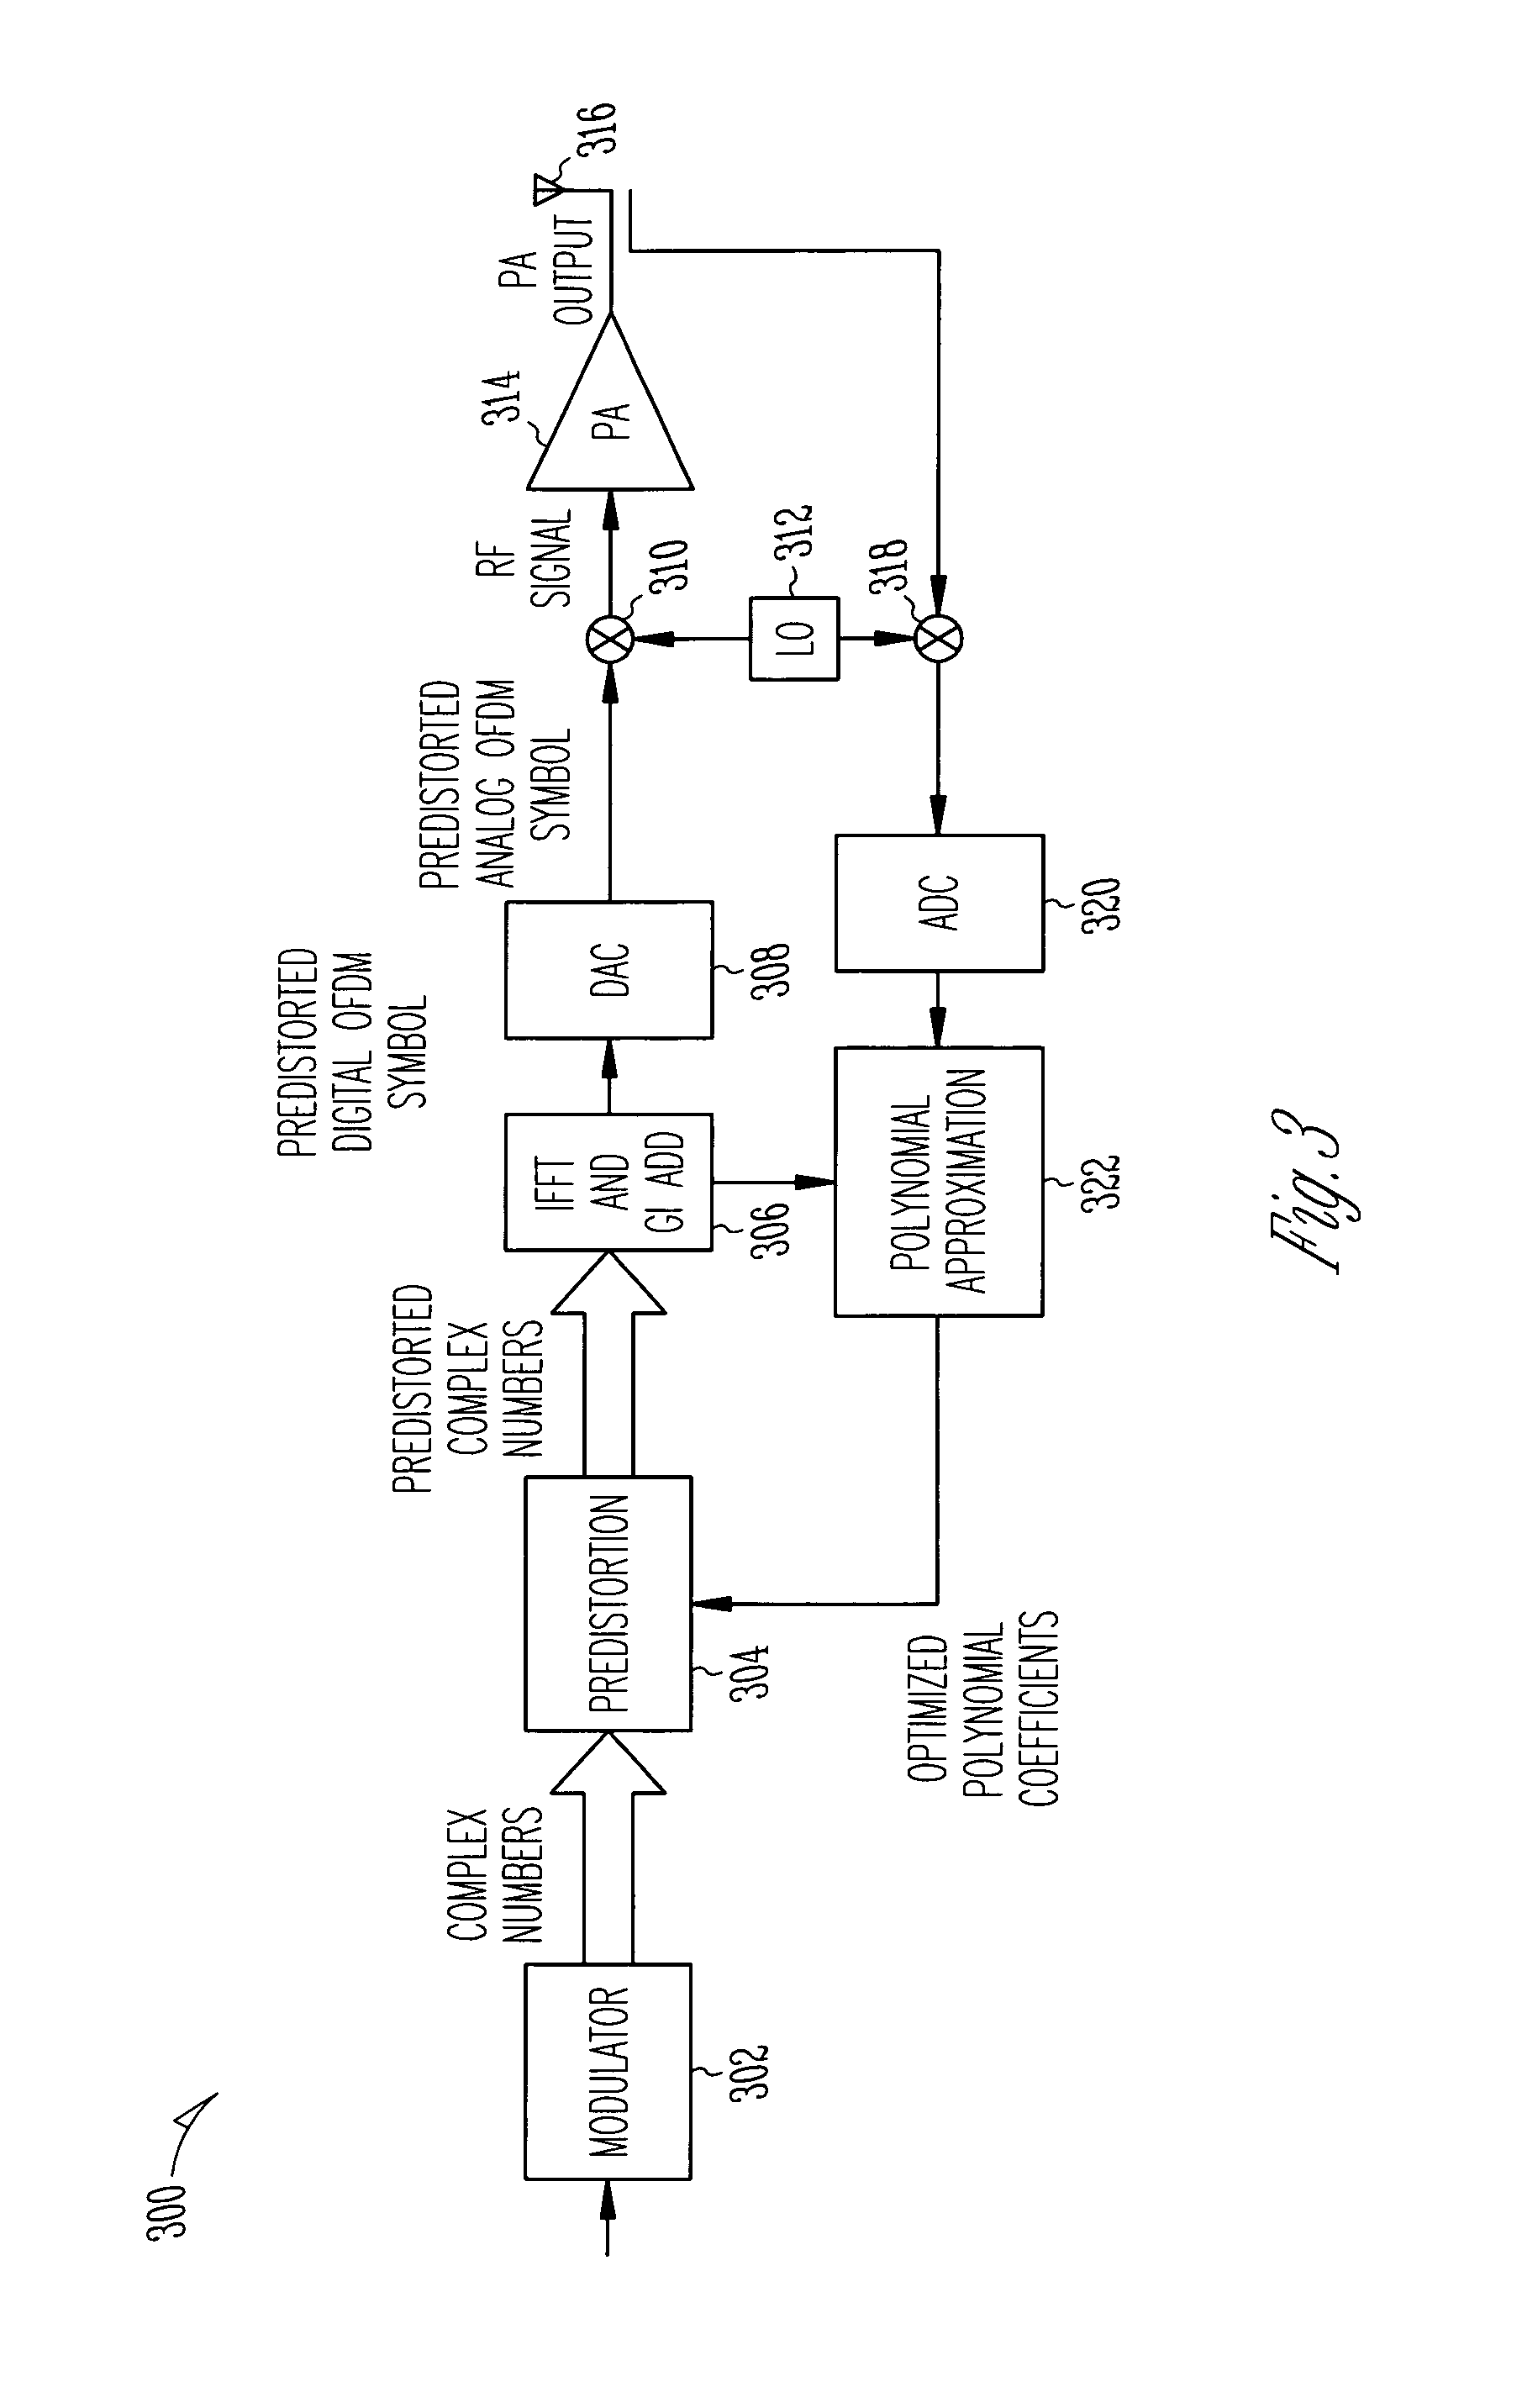 Power amplifier linearization methods and apparatus using predistortion in the frequency domain